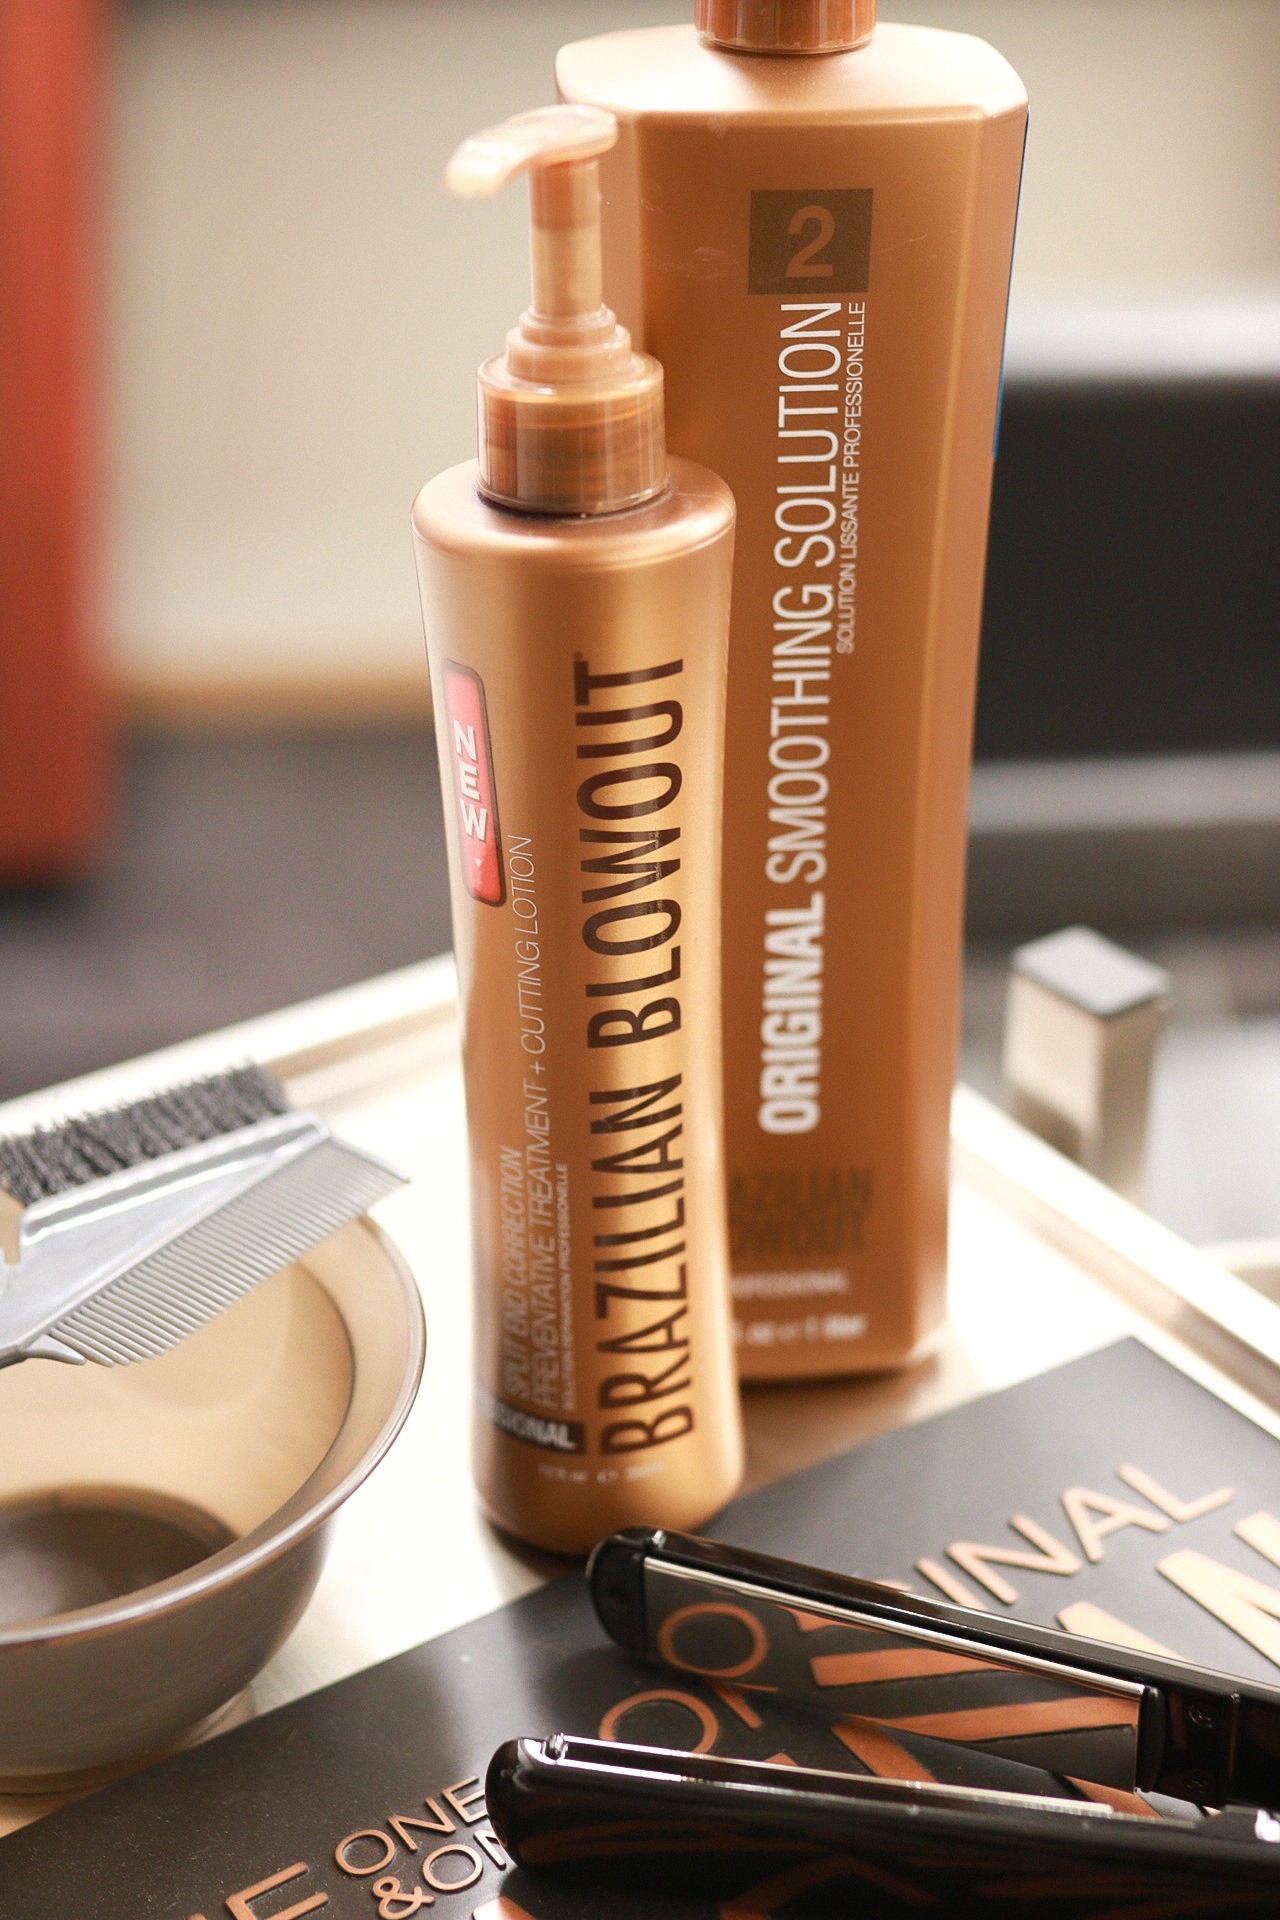 Up-close showcase of Brazilian Blowout solution and mask